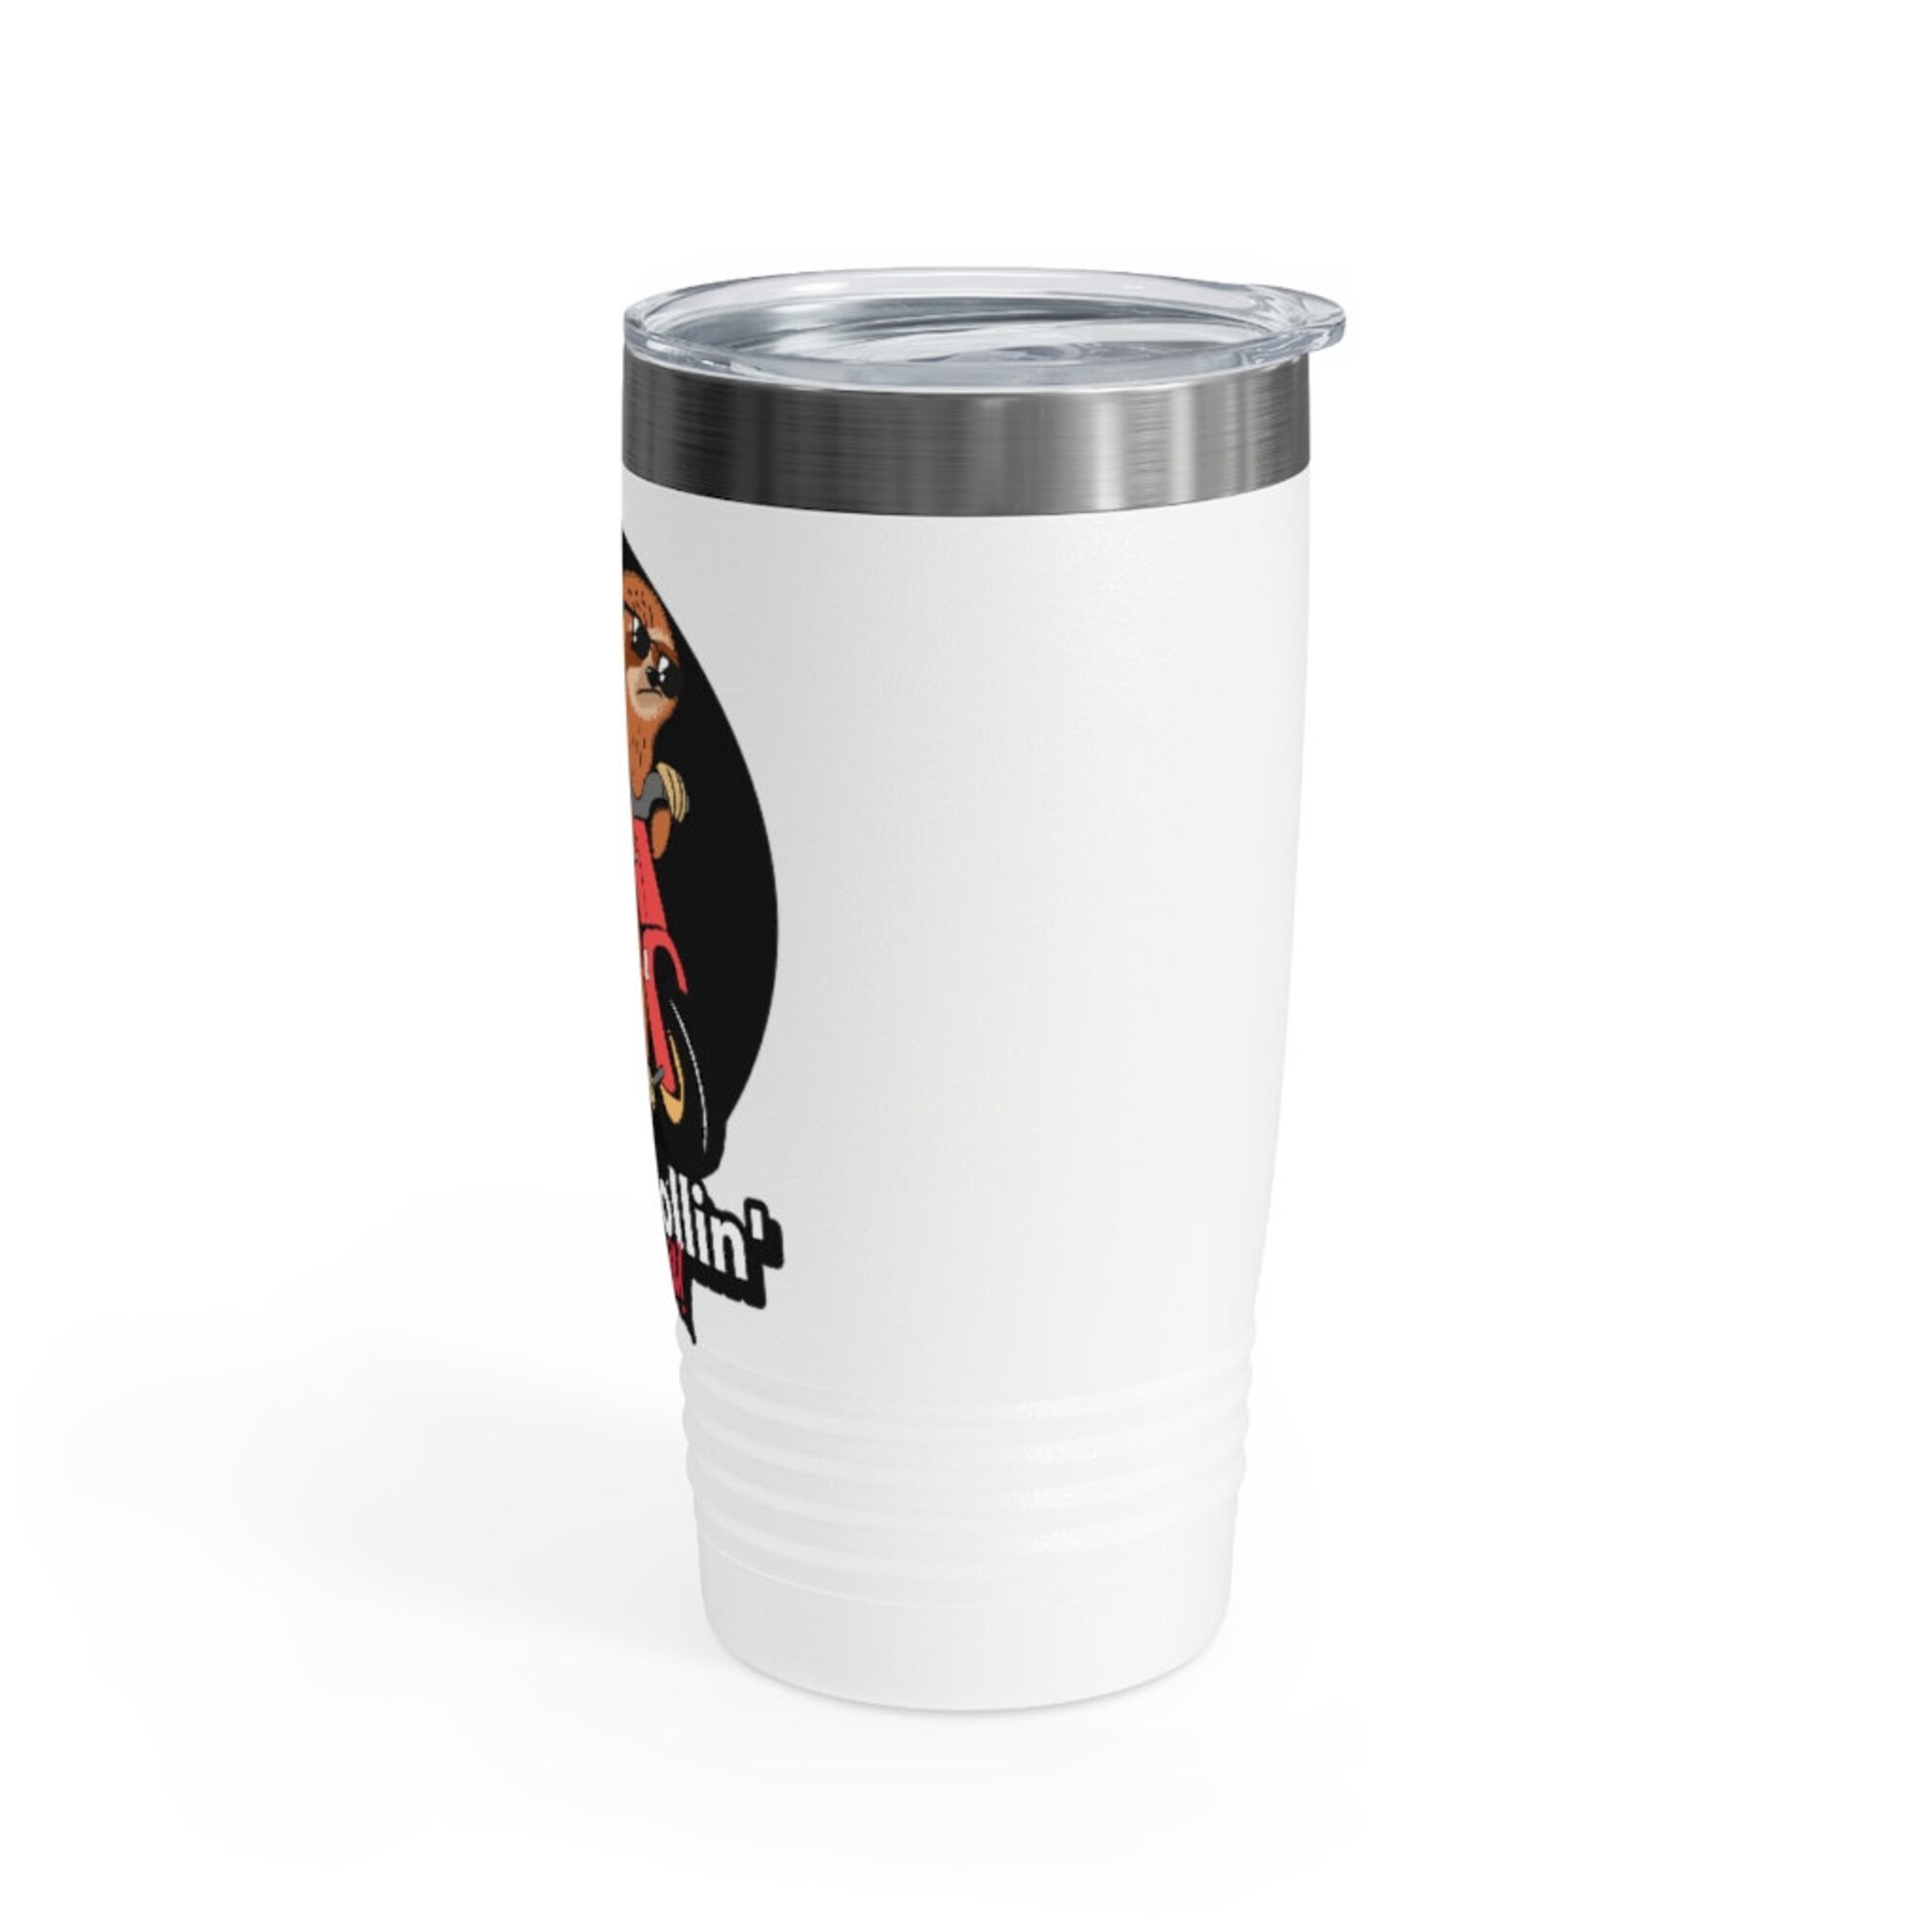 Just Rollin' with it Ringneck Tumbler, 20oz